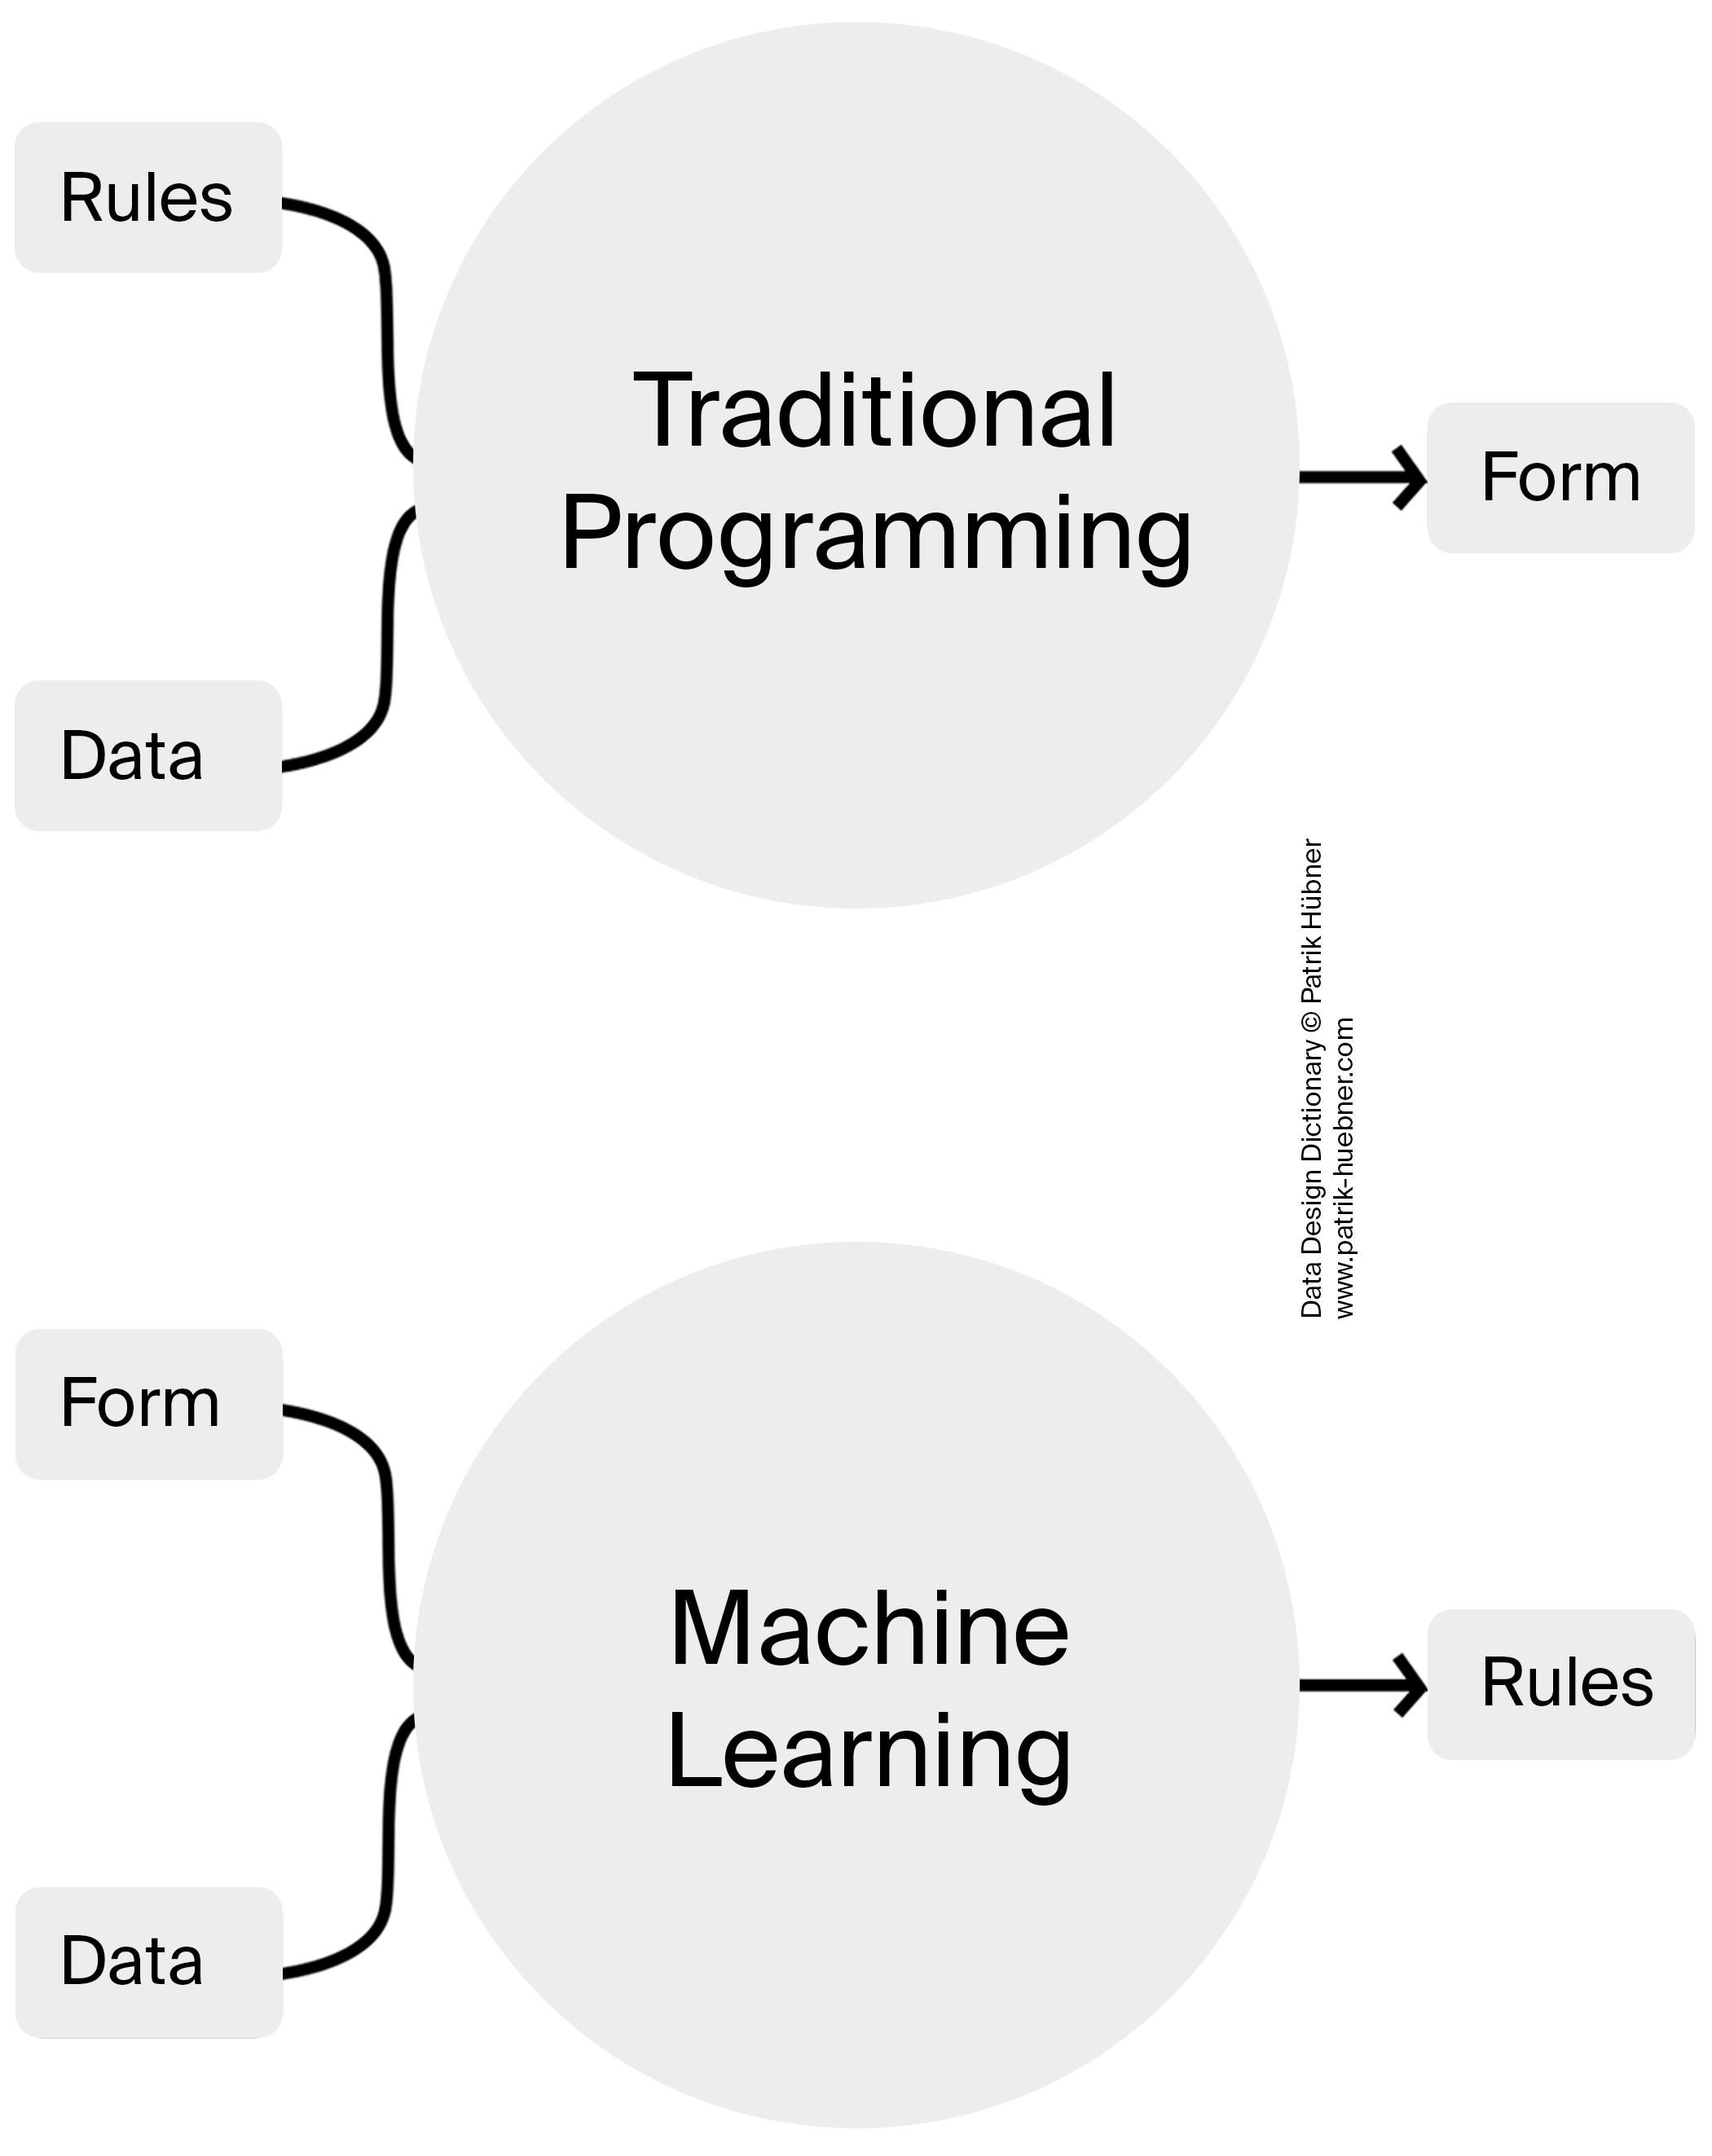 In traditional programming, developers input specific rules and data into a system to produce a desired array of form. Whereas in artificial intelligence, the algorithm uses data as well as form and its inherent structure to infer the rules itself.